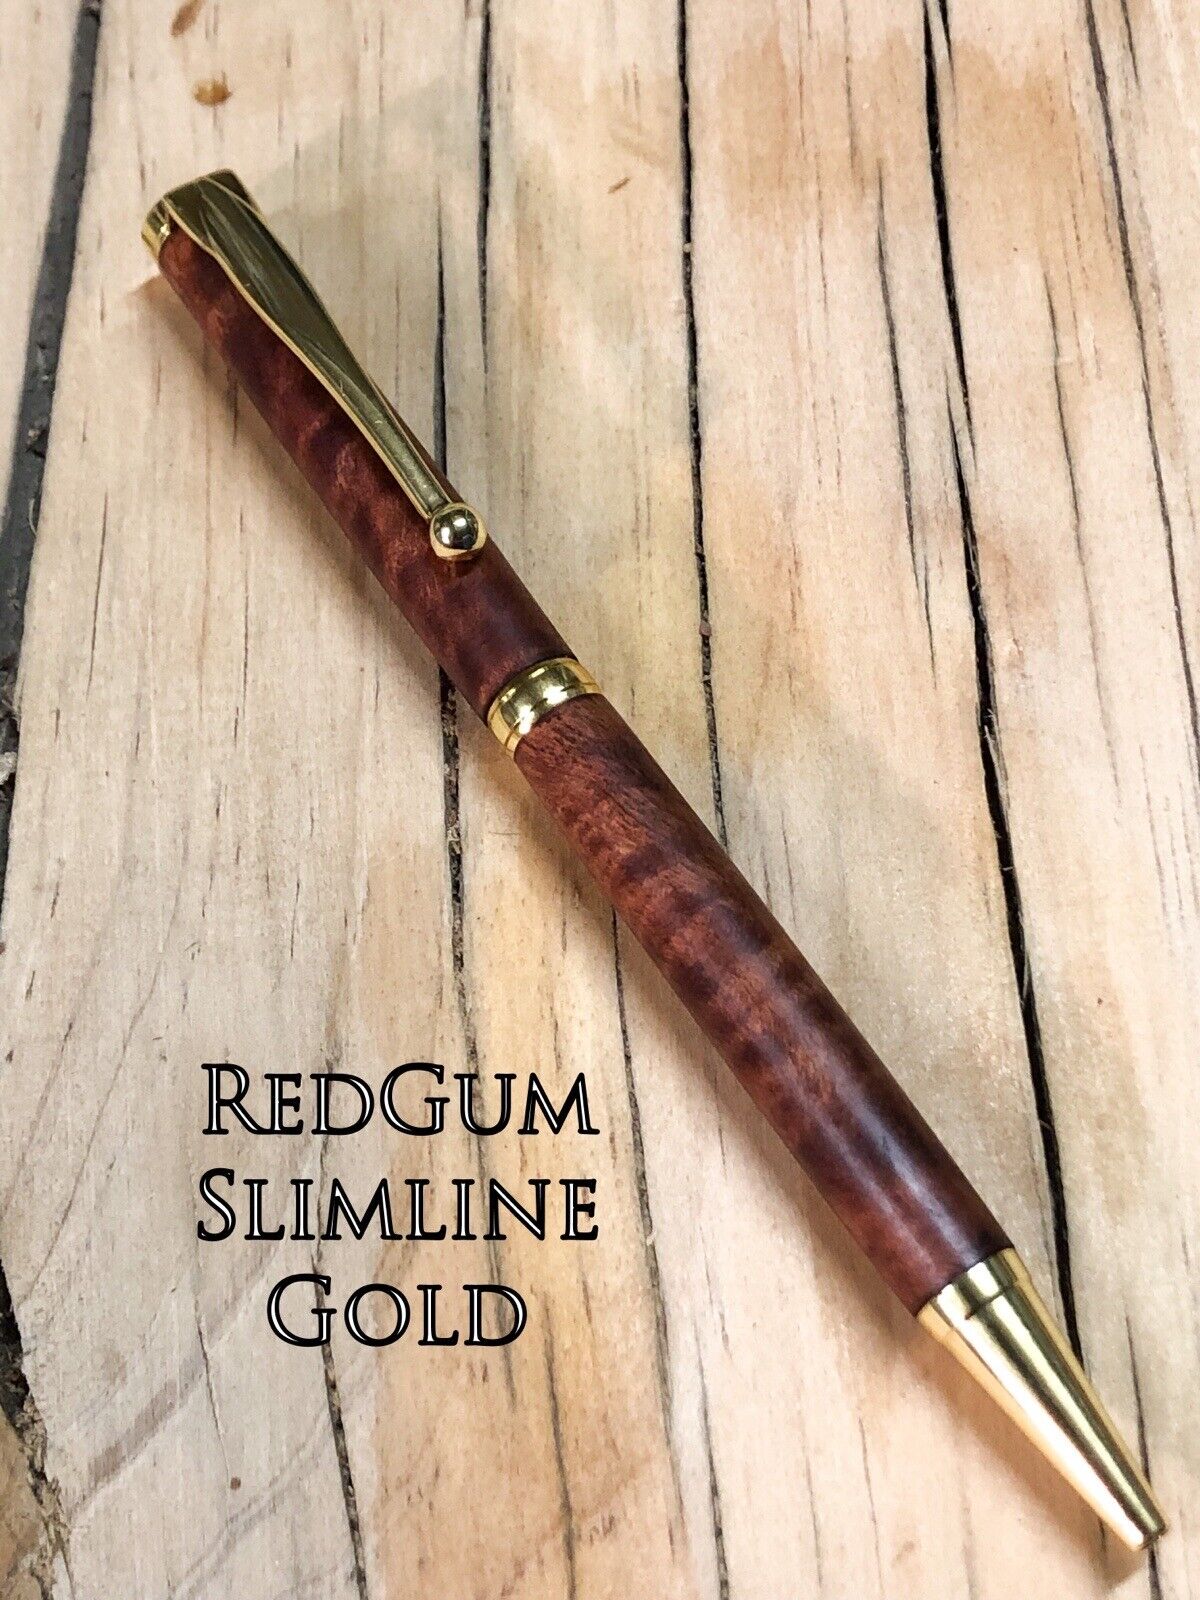 Beautiful Wood Pen Hand Made In Australia From Re-claimed Timber